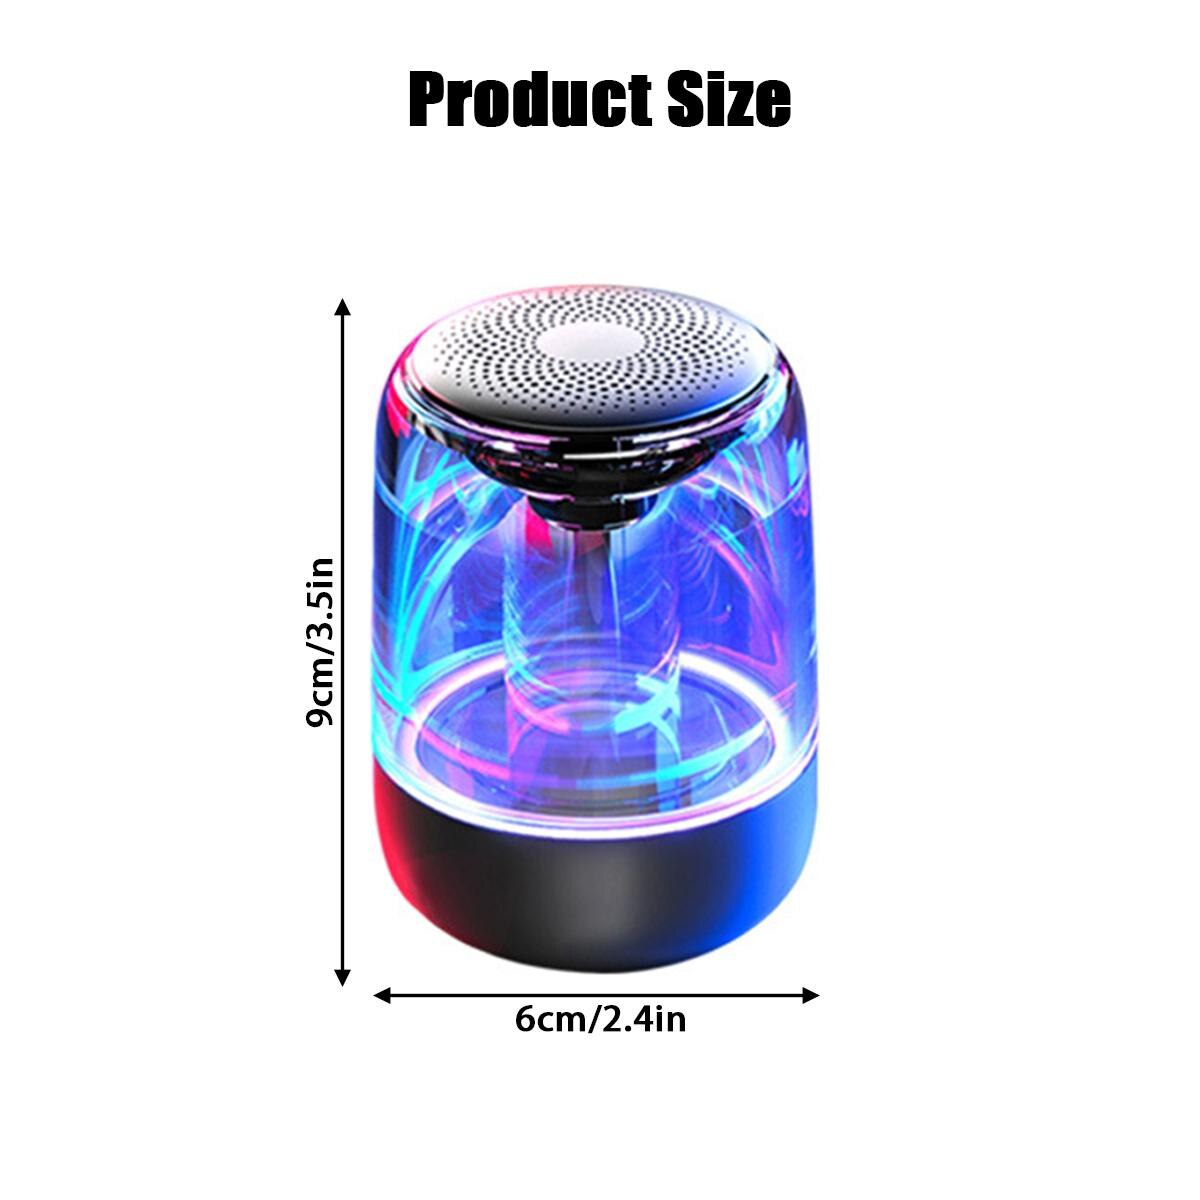 Bluetooth Wireless Speakers Waterproof Stereo Column Portable Bass Subwoofer Speaker Colorful Light Support TF Card with Mic